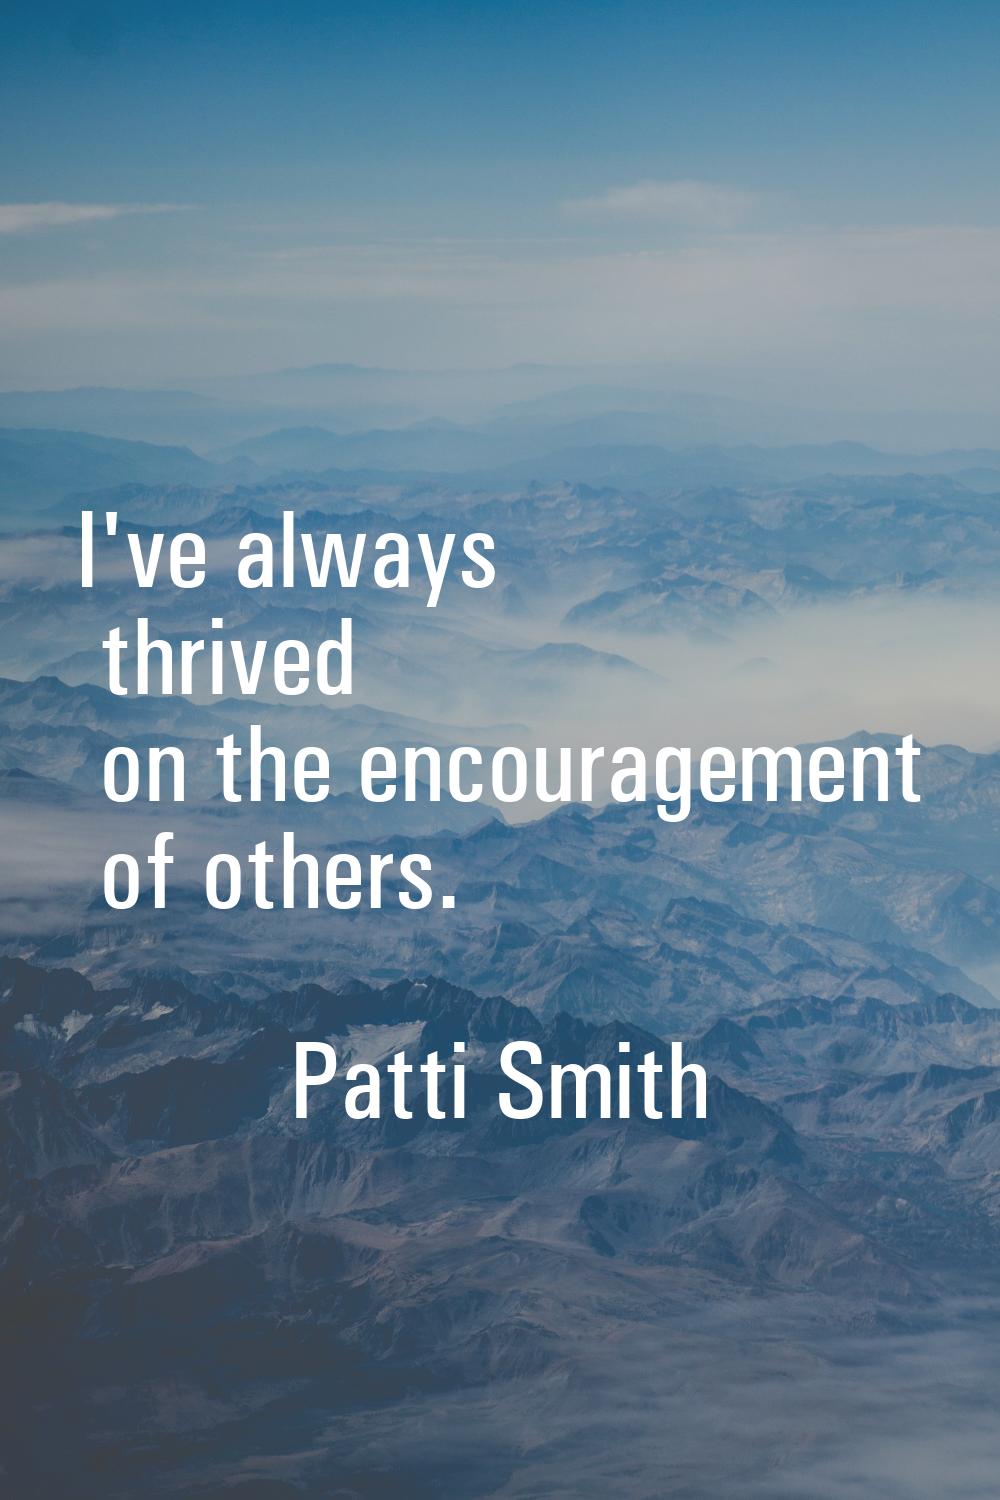 I've always thrived on the encouragement of others.